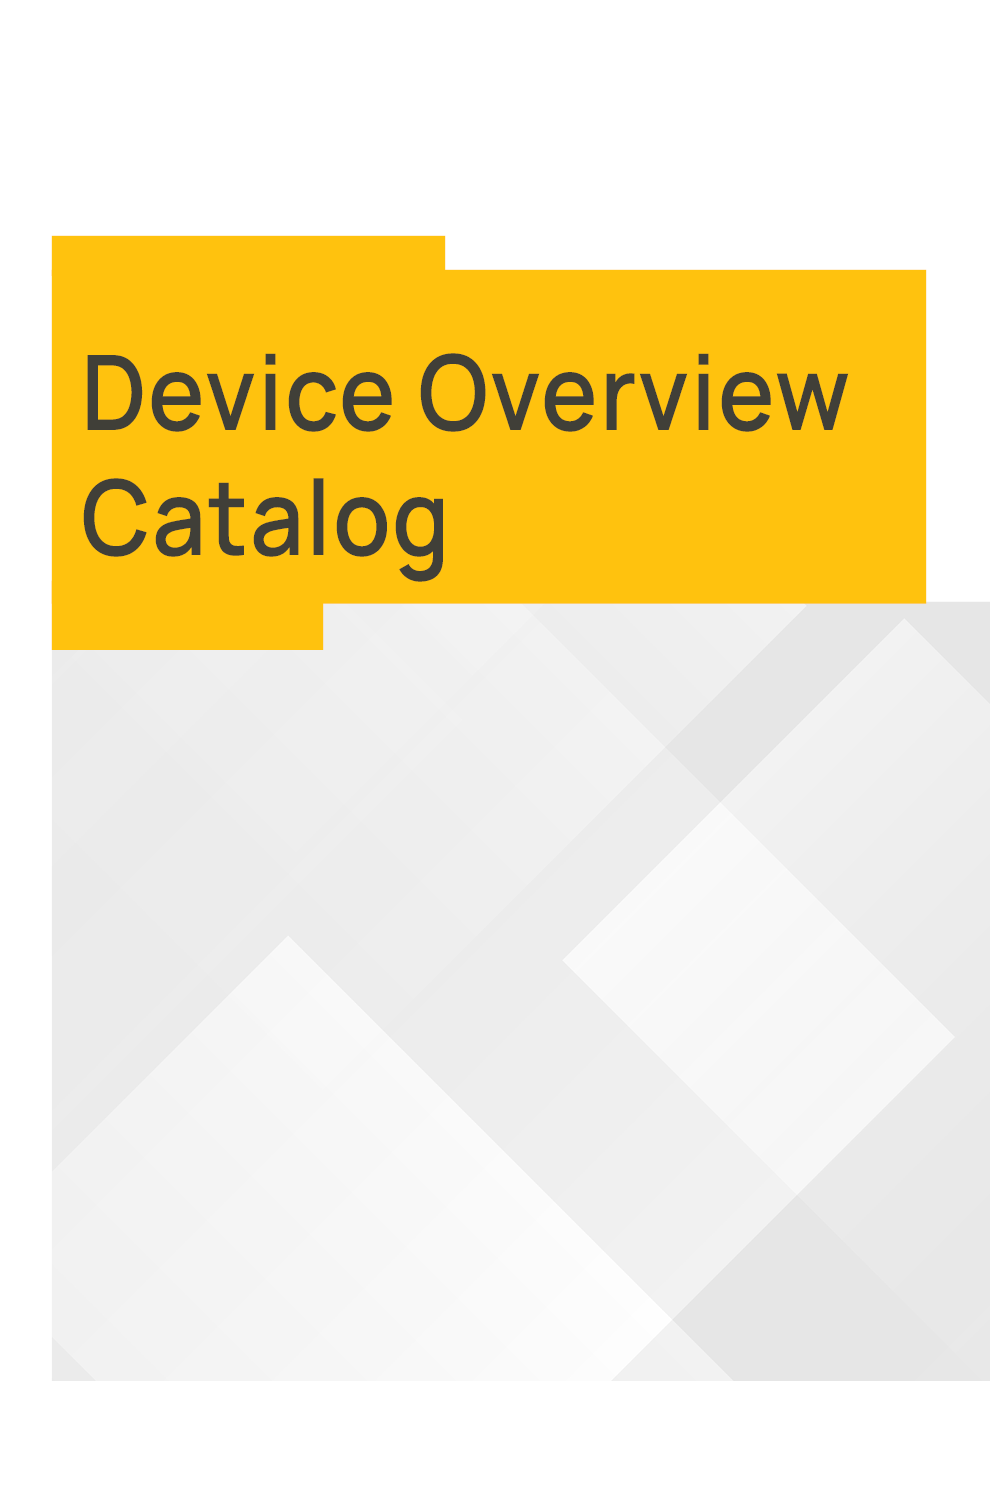 Device Overview Catalog